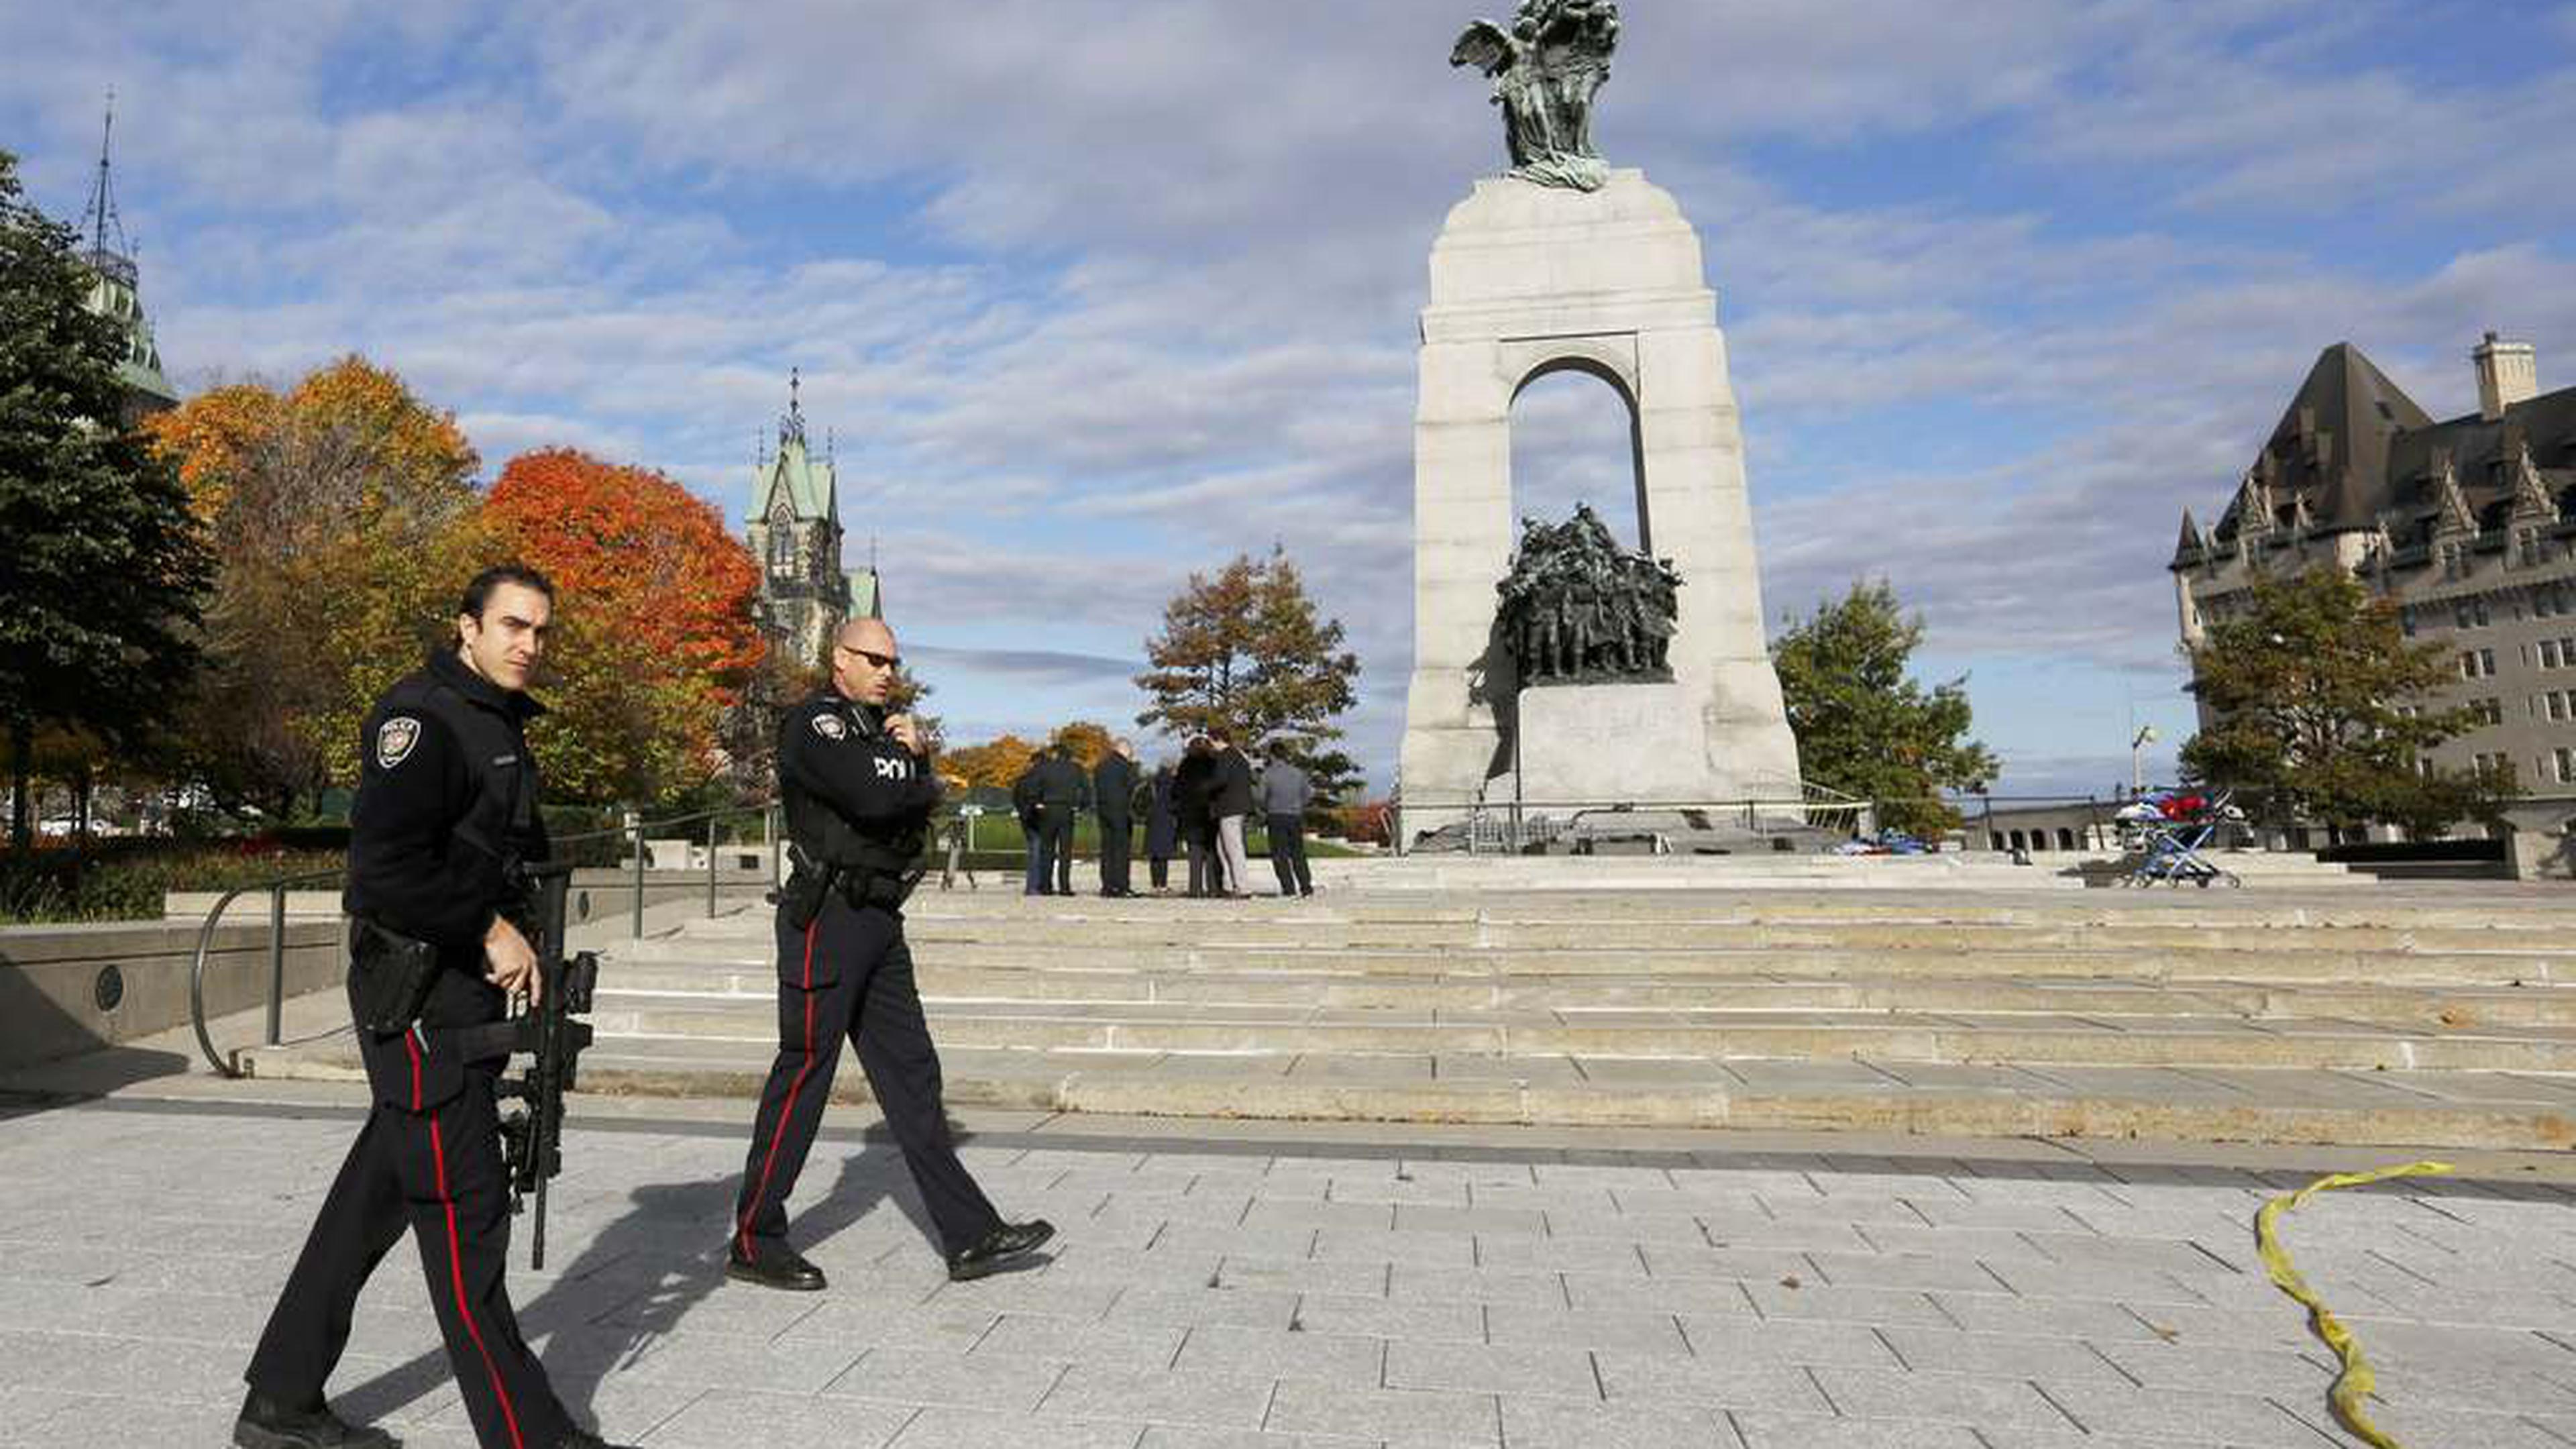 Police officers patrol alongside the Canadian War Memorial following a shooting incident in Ottawa October 22, 2014.  A Canadian soldier was shot at the Canadian War Memorial and a shooter was seen running towards the nearby parliament buildings, where more shots were fired, according to media and eyewitness reports.  REUTERS/Chris Wattie (CANADA  - Tags: POLITICS CRIME LAW)